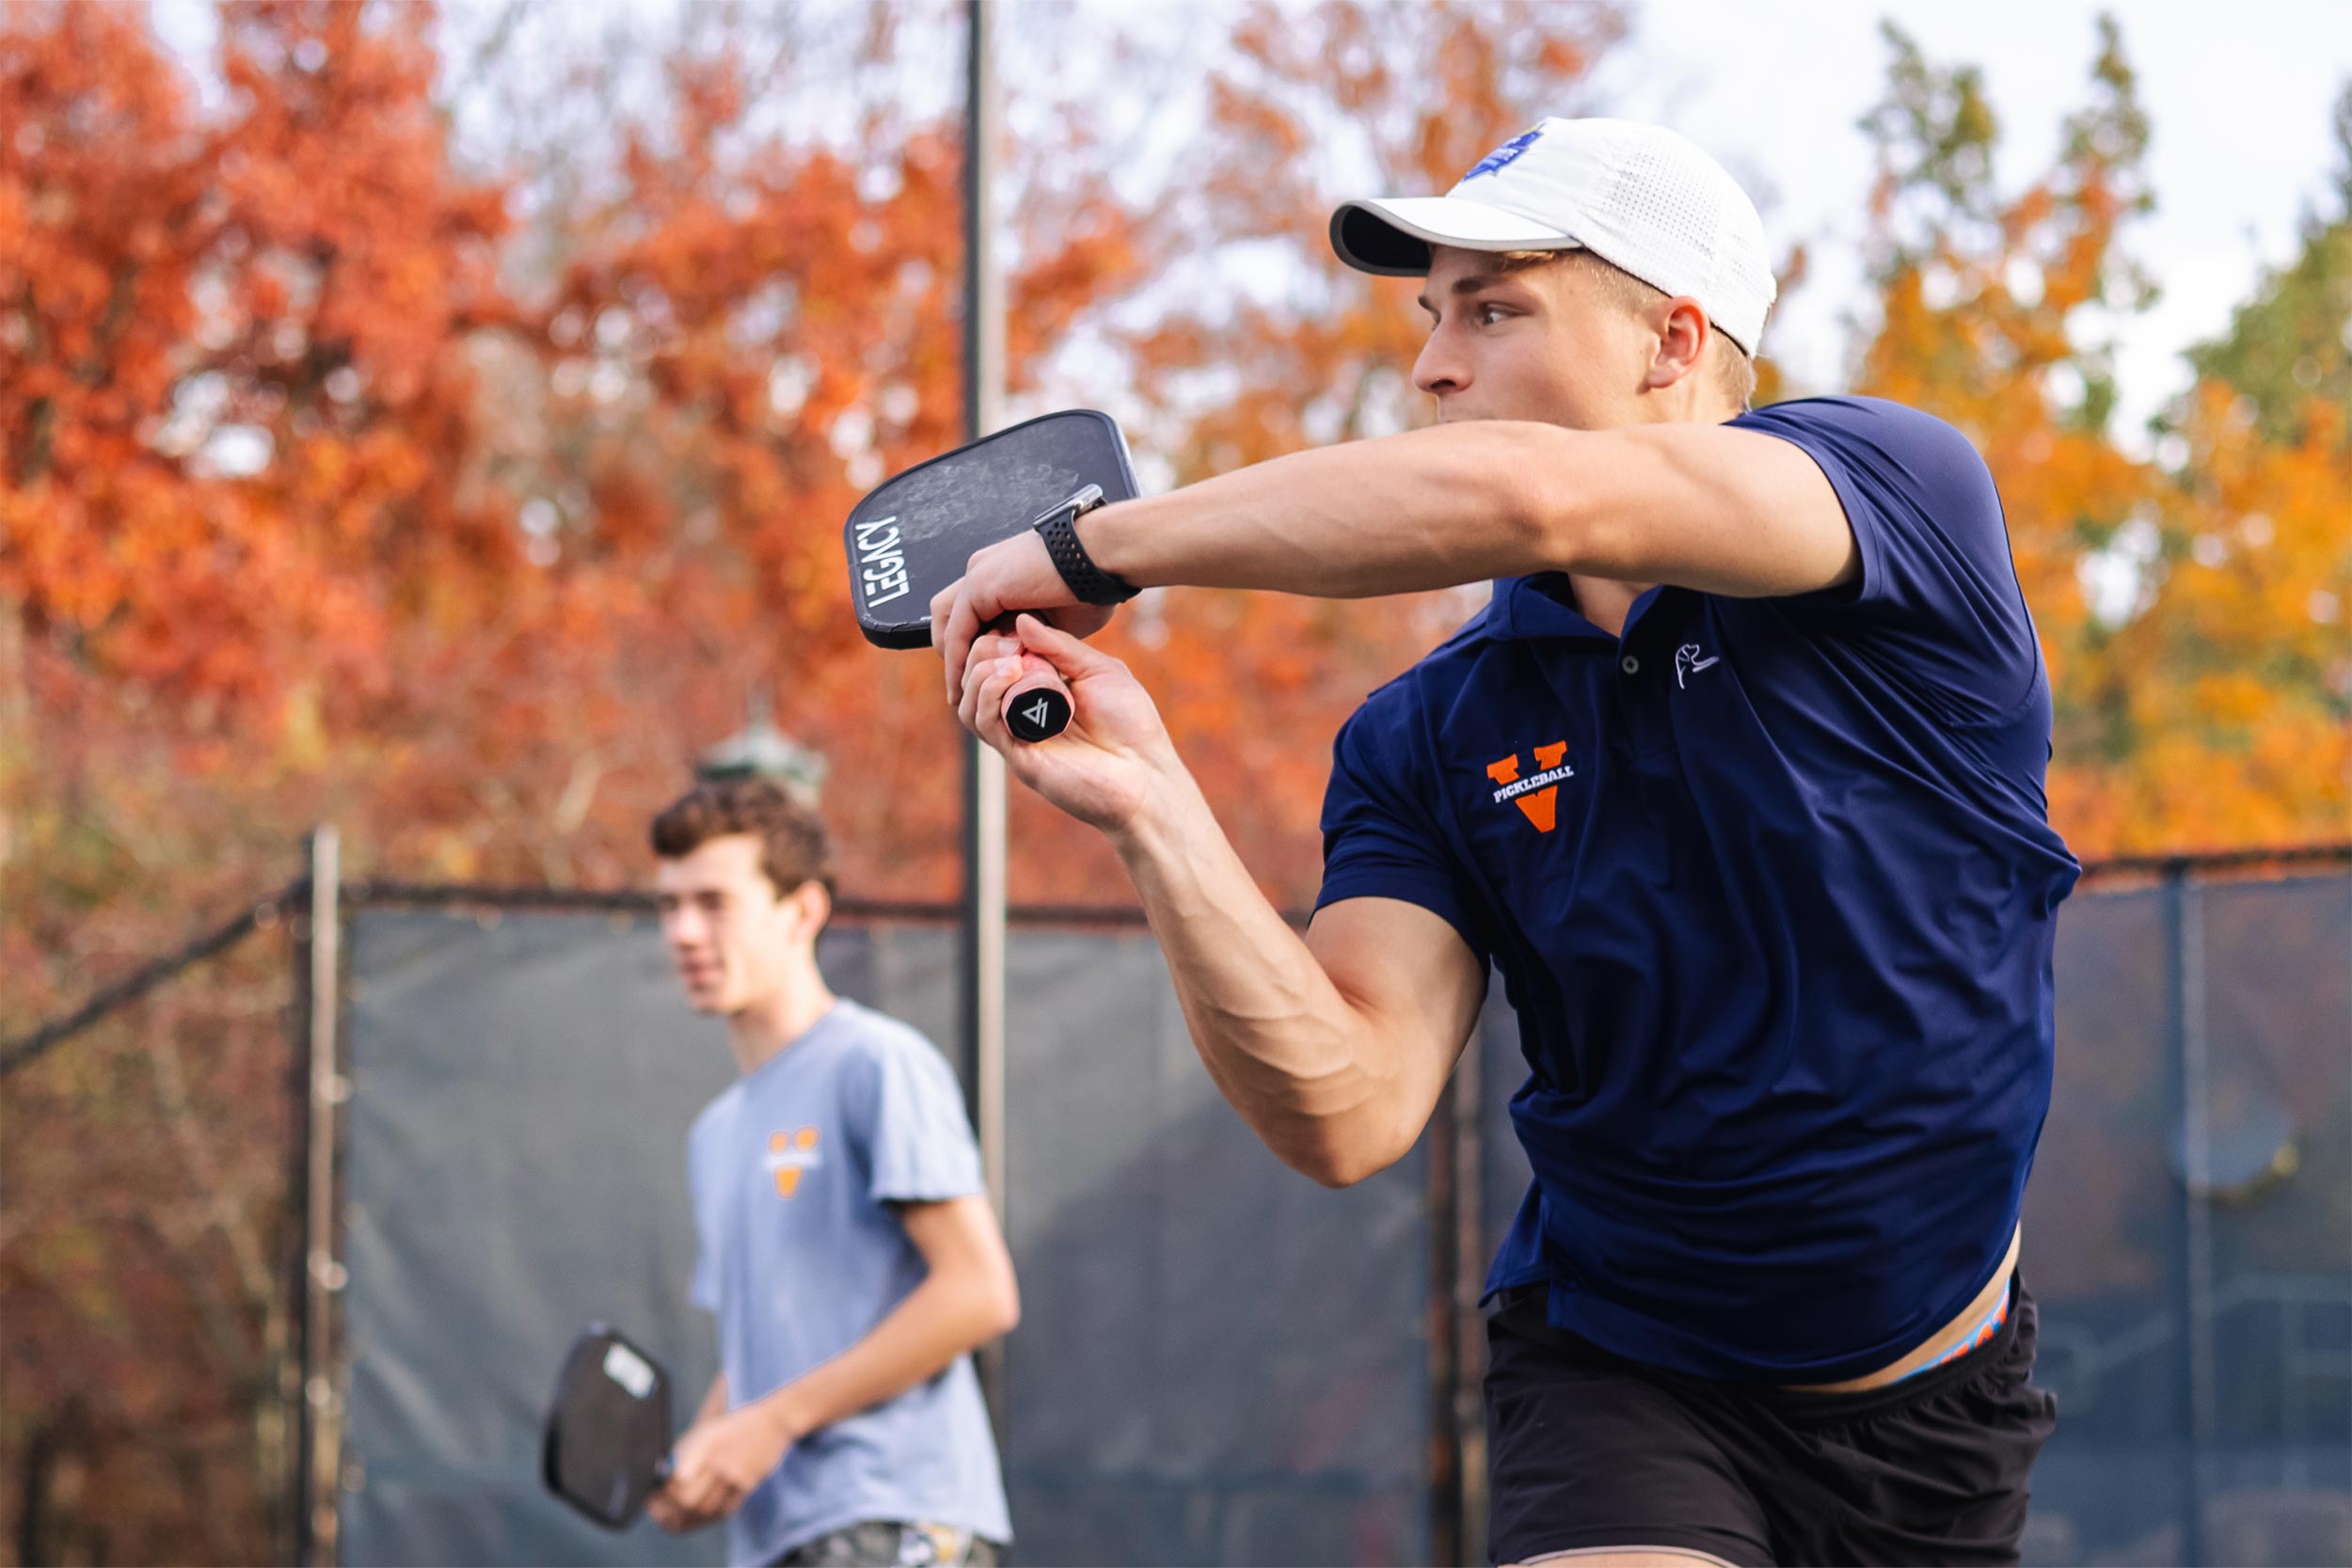 A pickleball player action photo during a match